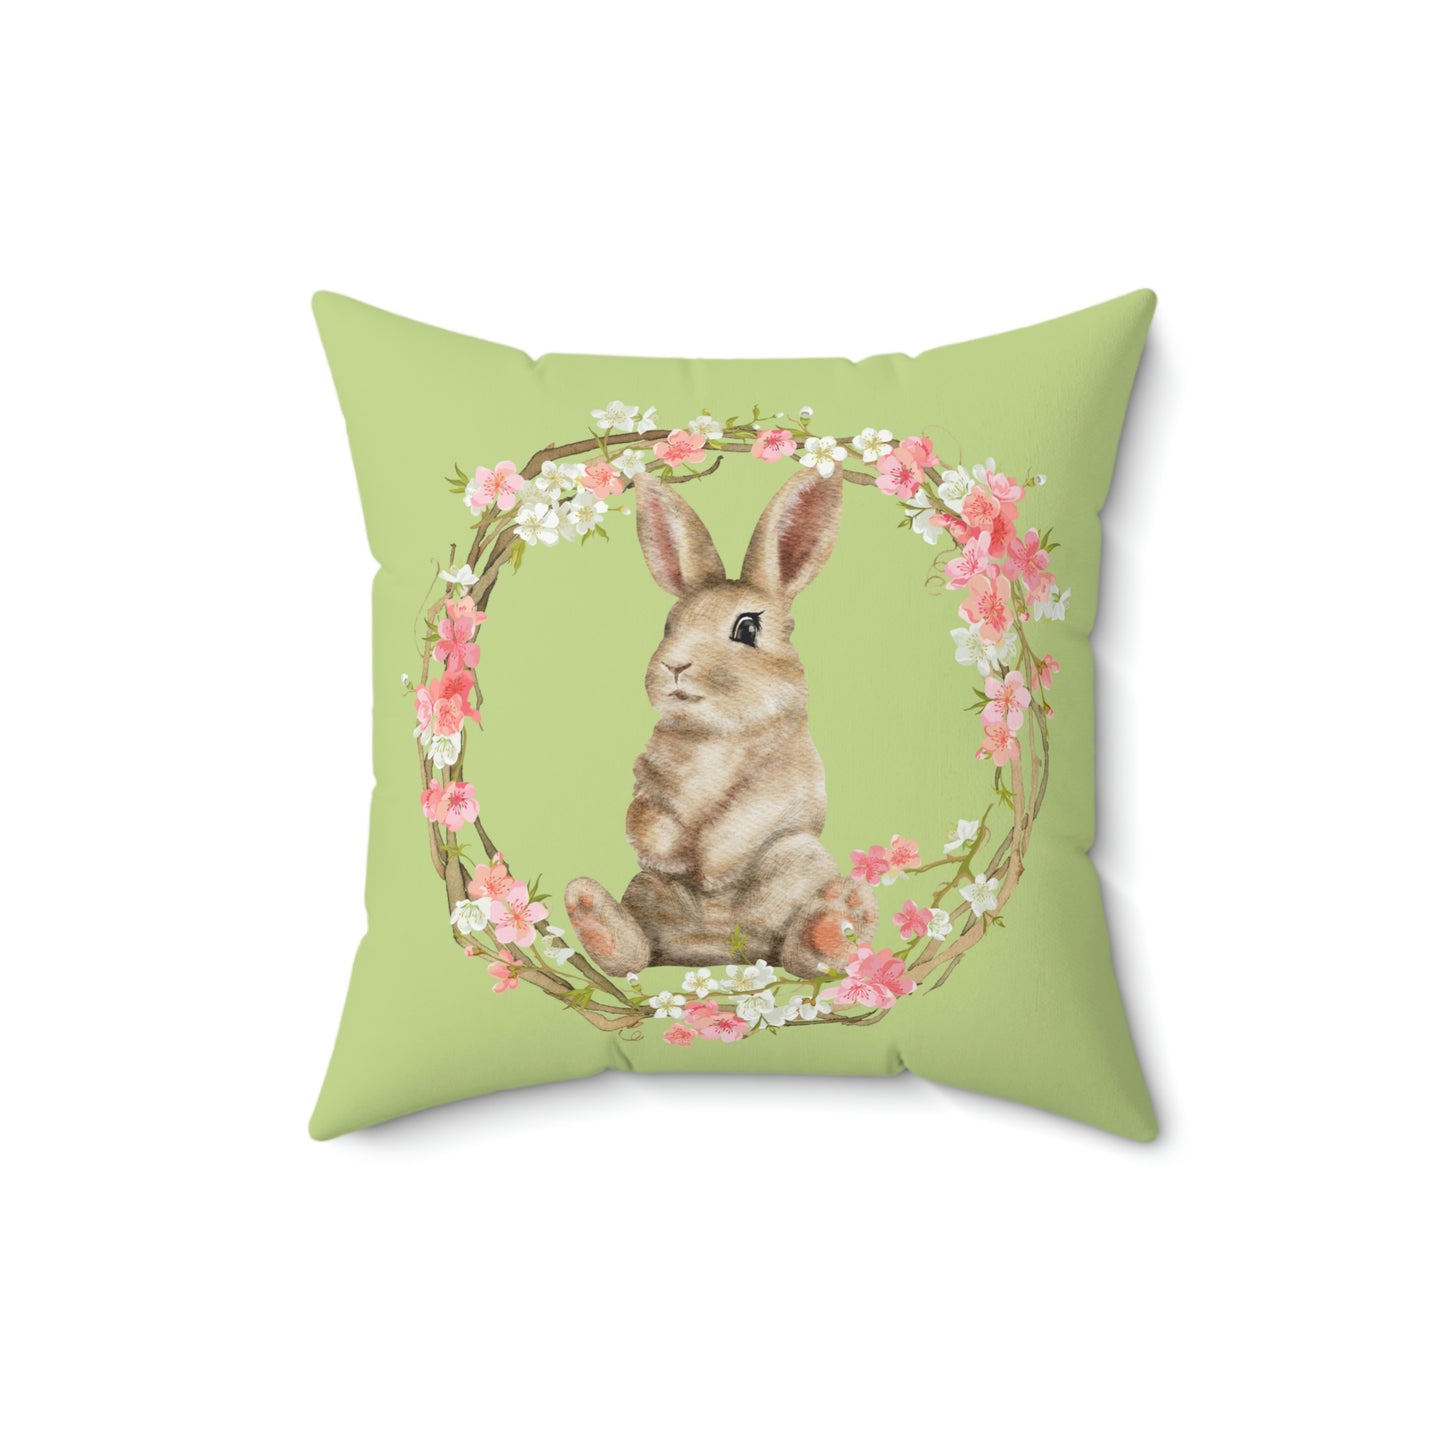 Adorable Bunny/Rabbit with Floral Wreath design Spun Polyester Square Indoor Pillow